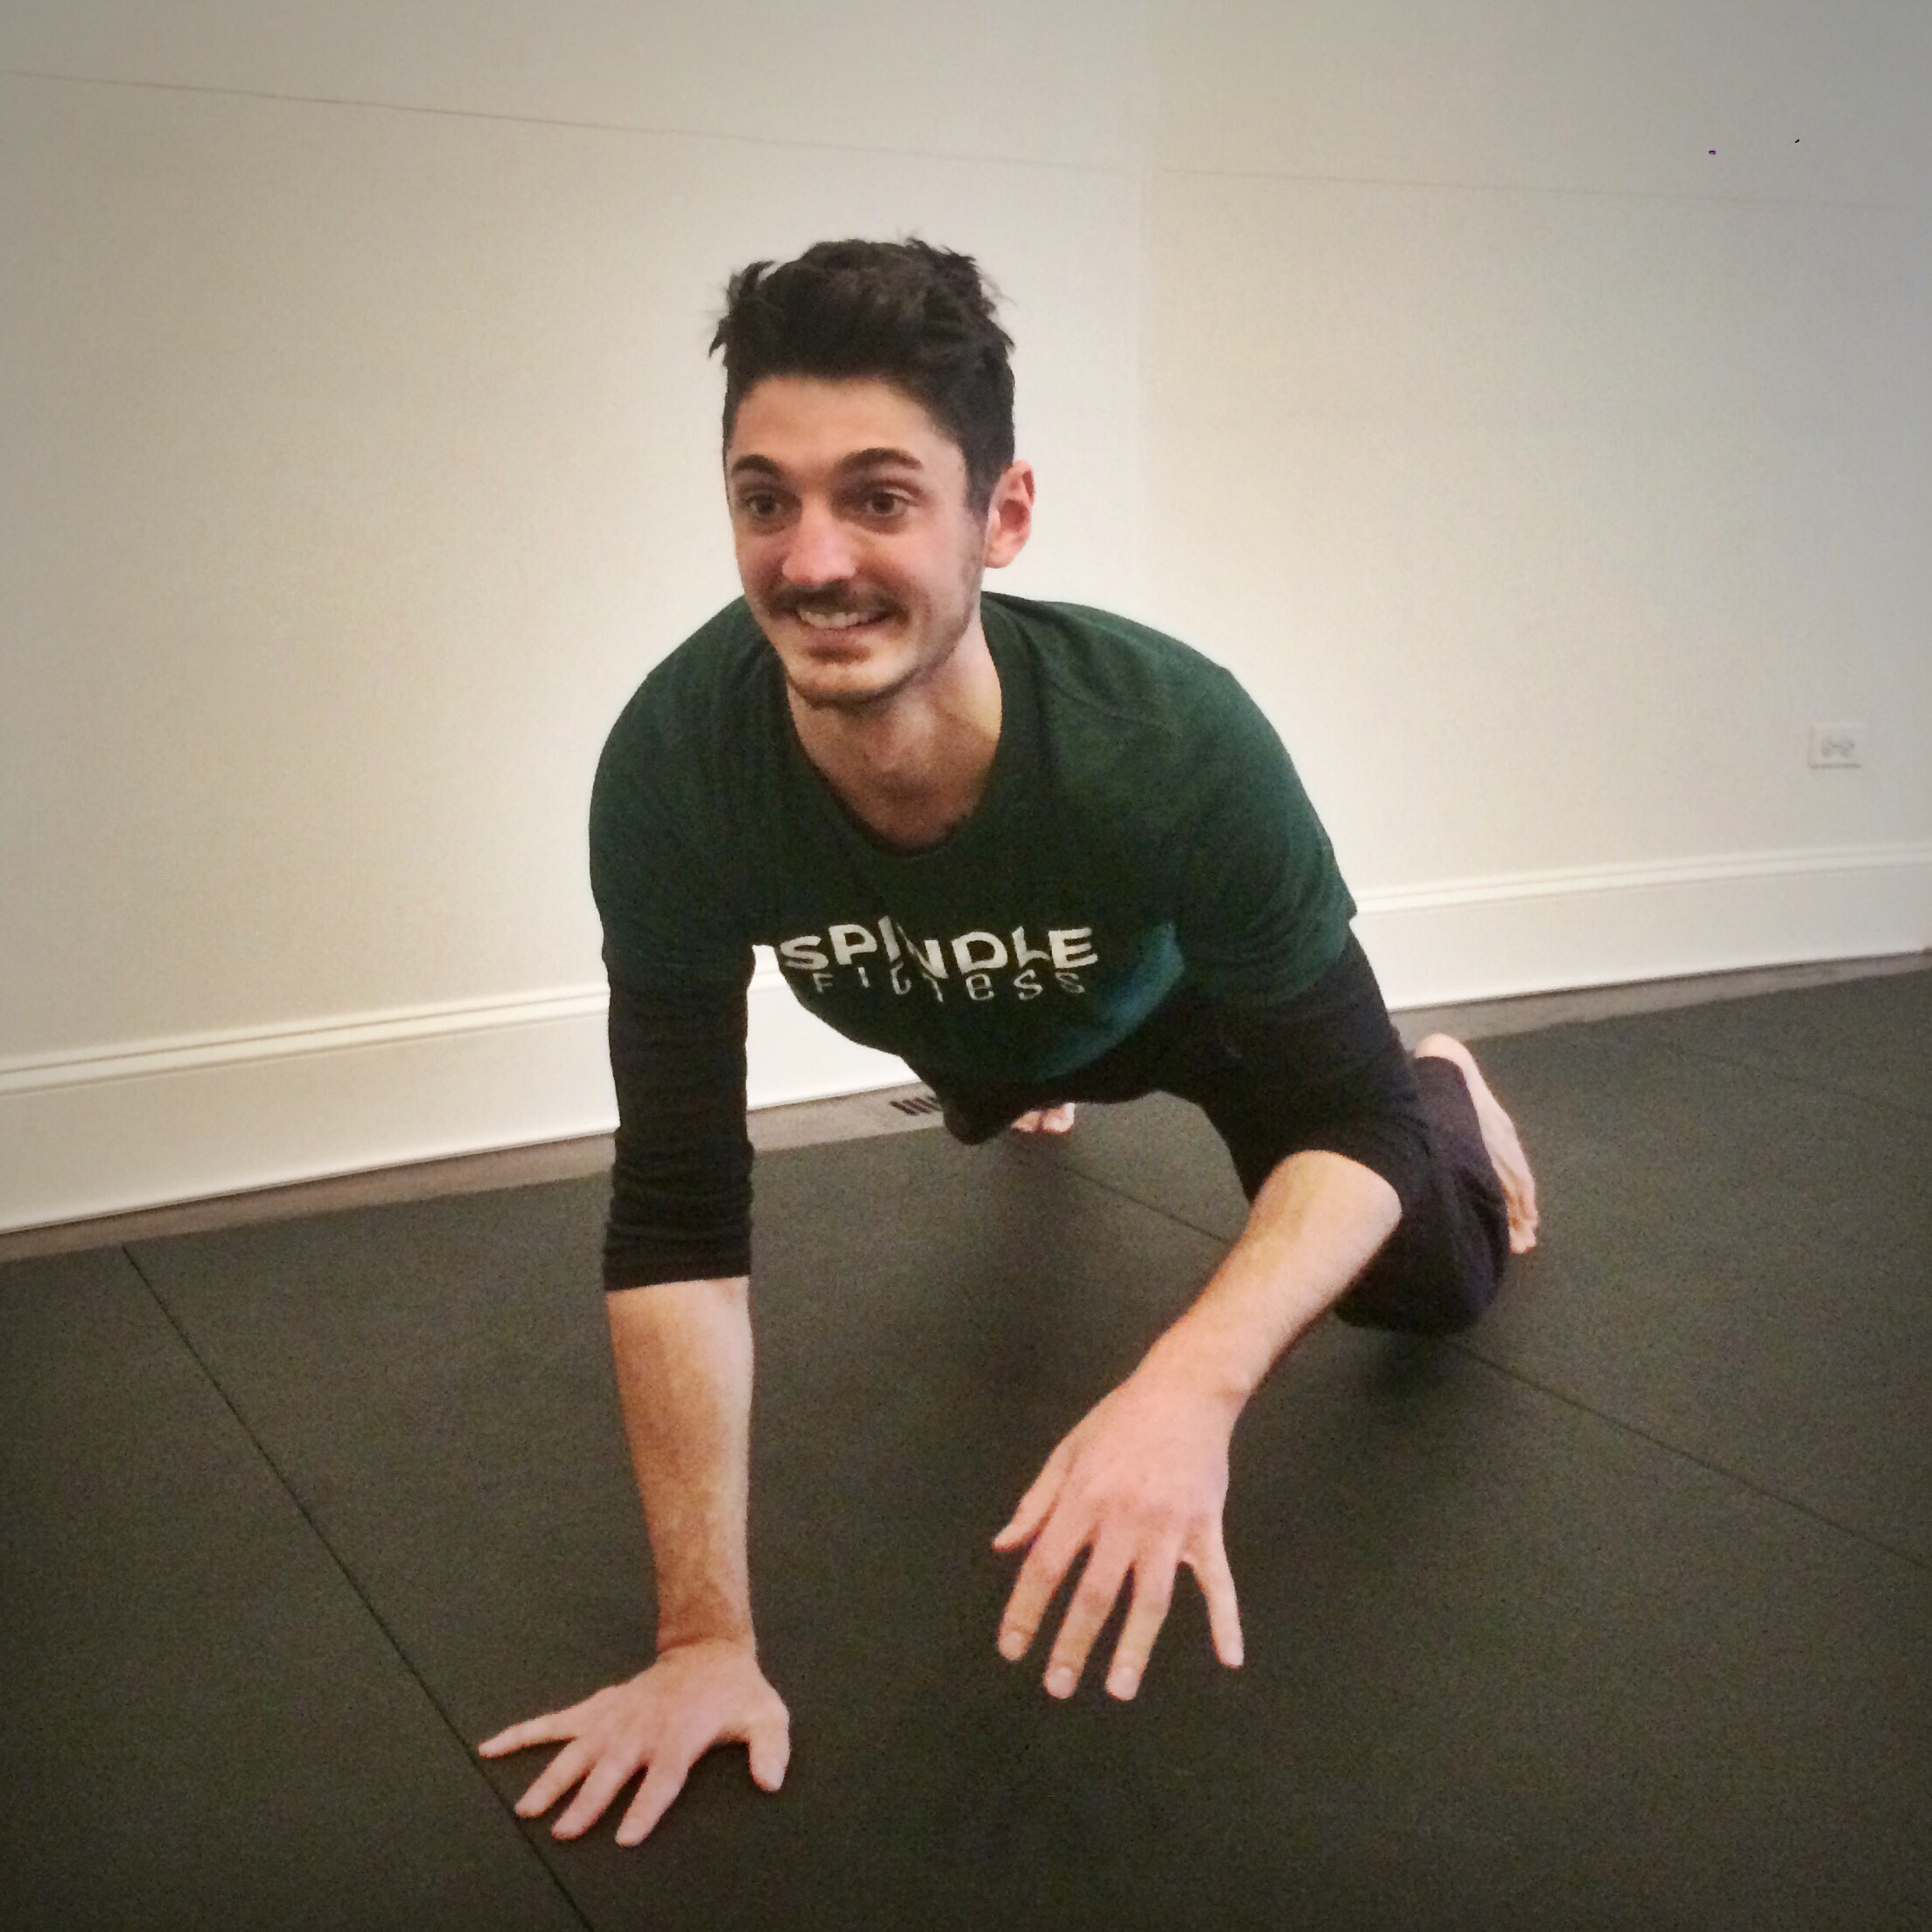 MOVEMENT FOCUS: LEOPARD CRAWL — Spindle Fitness